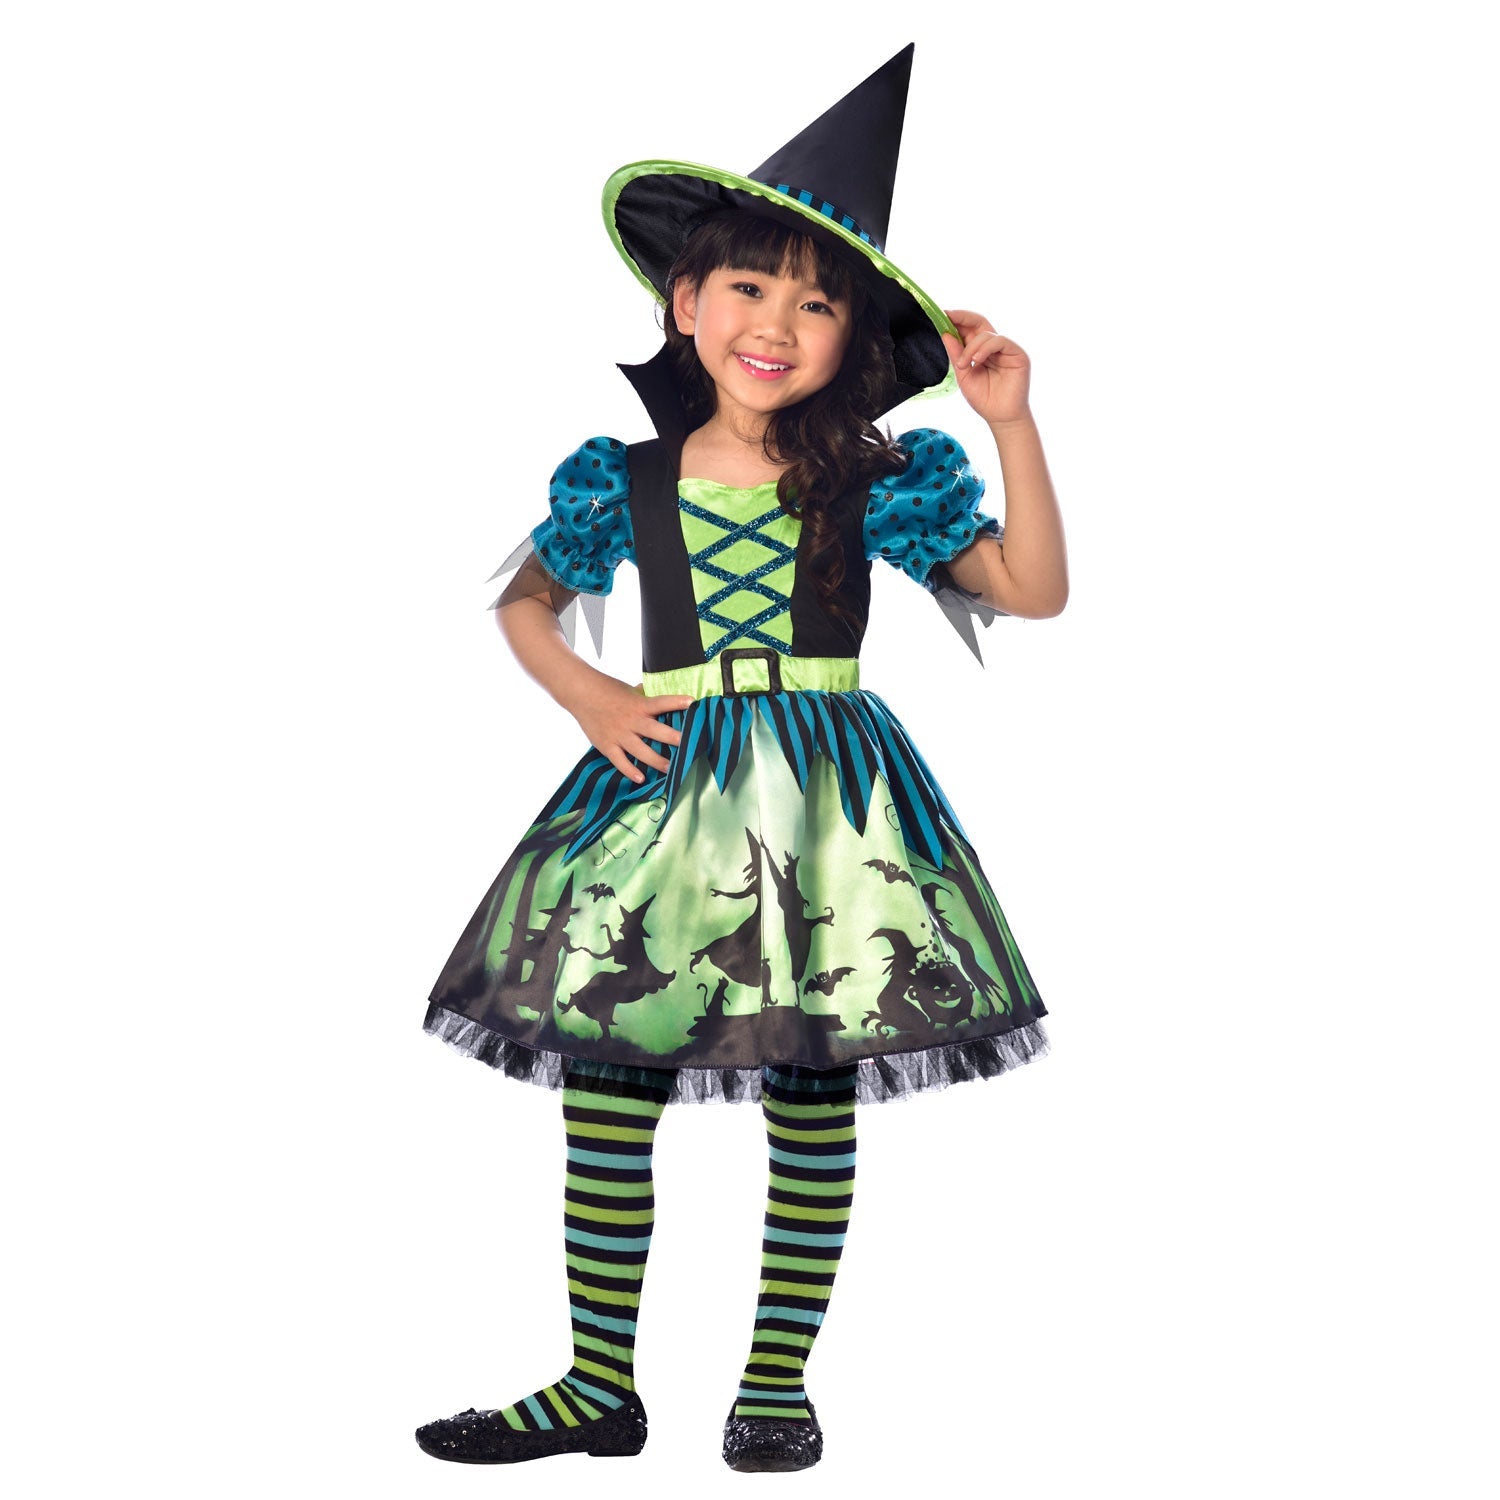 Girls Hocus Pocus Halloween Witch Costume includes dress and hat